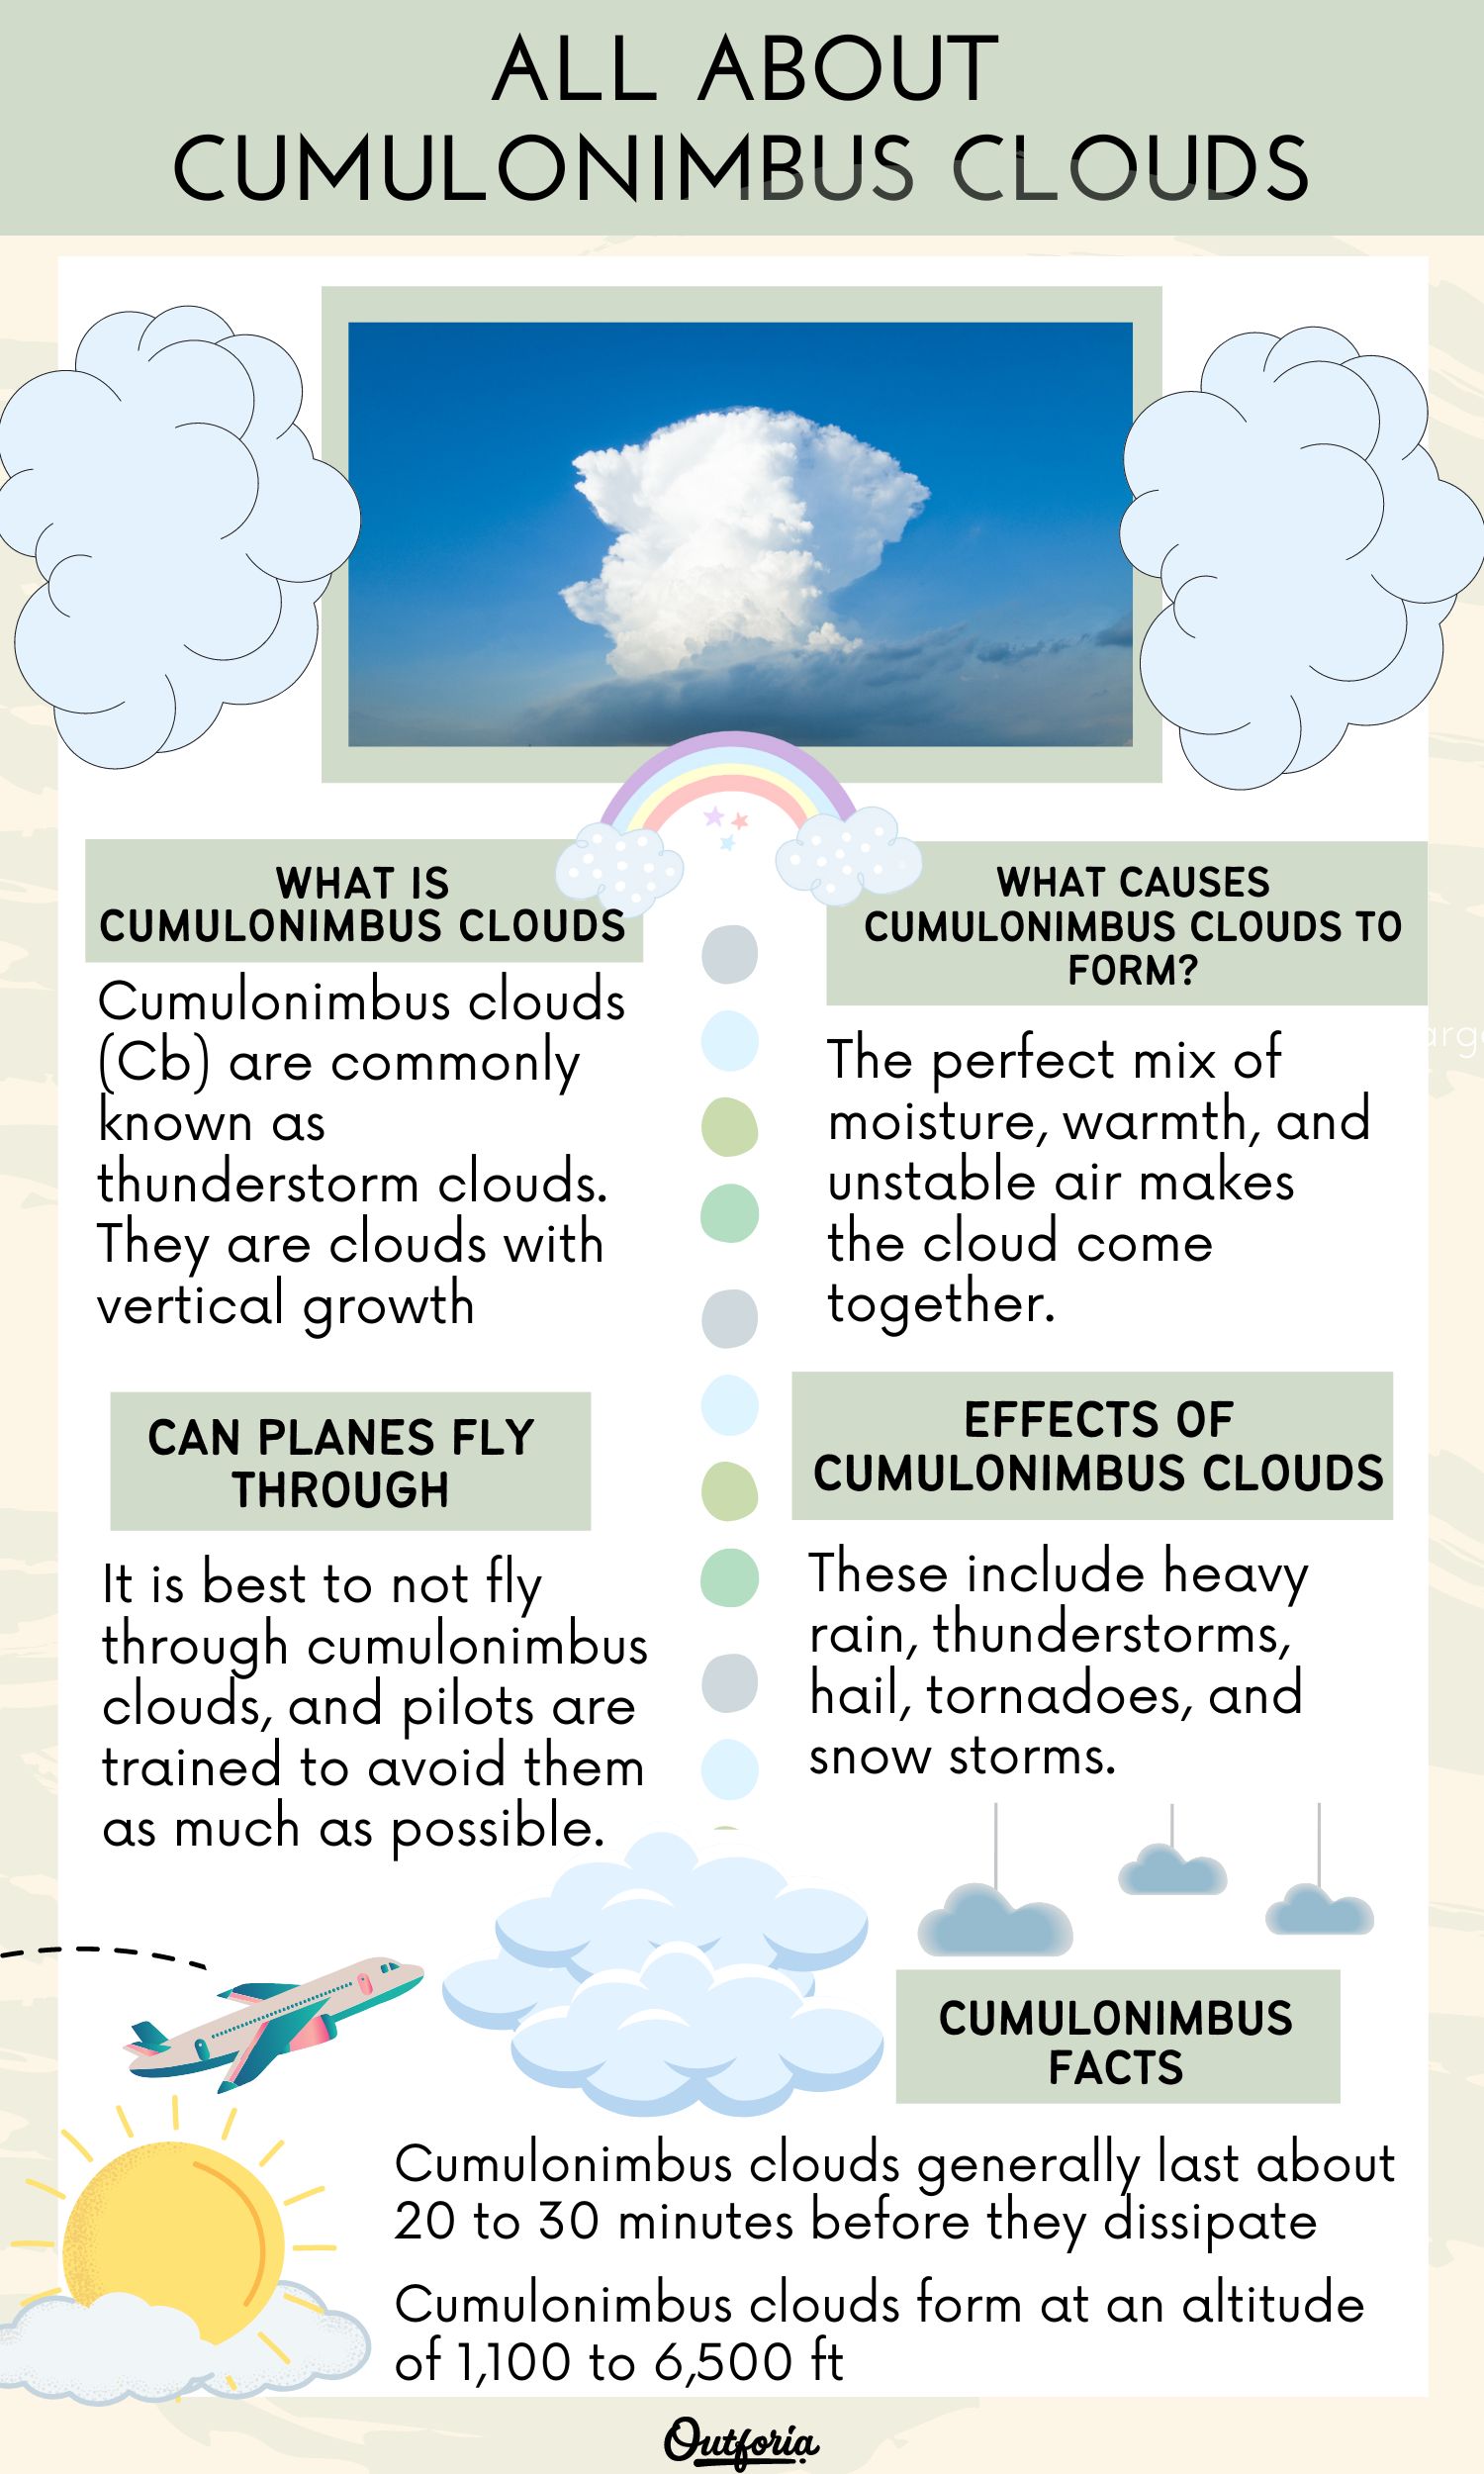 Chart about cumulonimbus clouds with facts, photos, and more